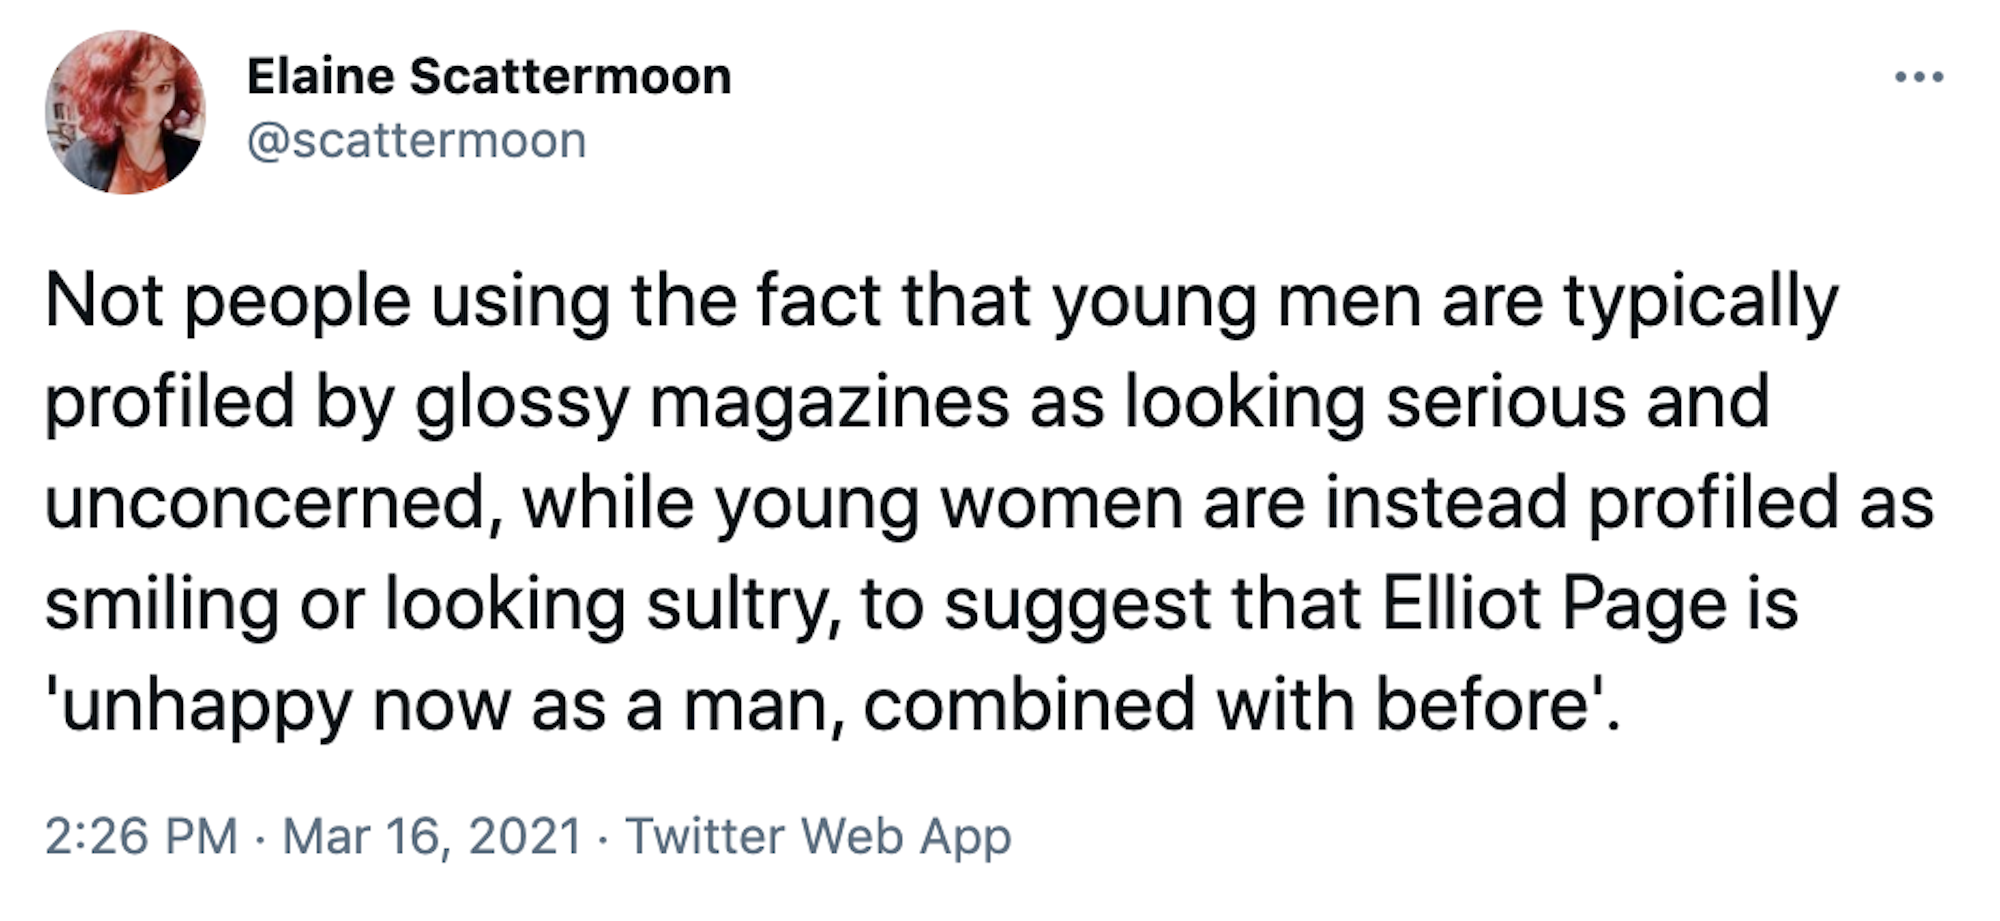 Not people using the fact that young men are typically profiled by glossy magazines as looking serious and unconcerned, while young women are instead profiled as smiling or looking sultry, to suggest that Elliot Page is 'unhappy now as a man, combined with before'.